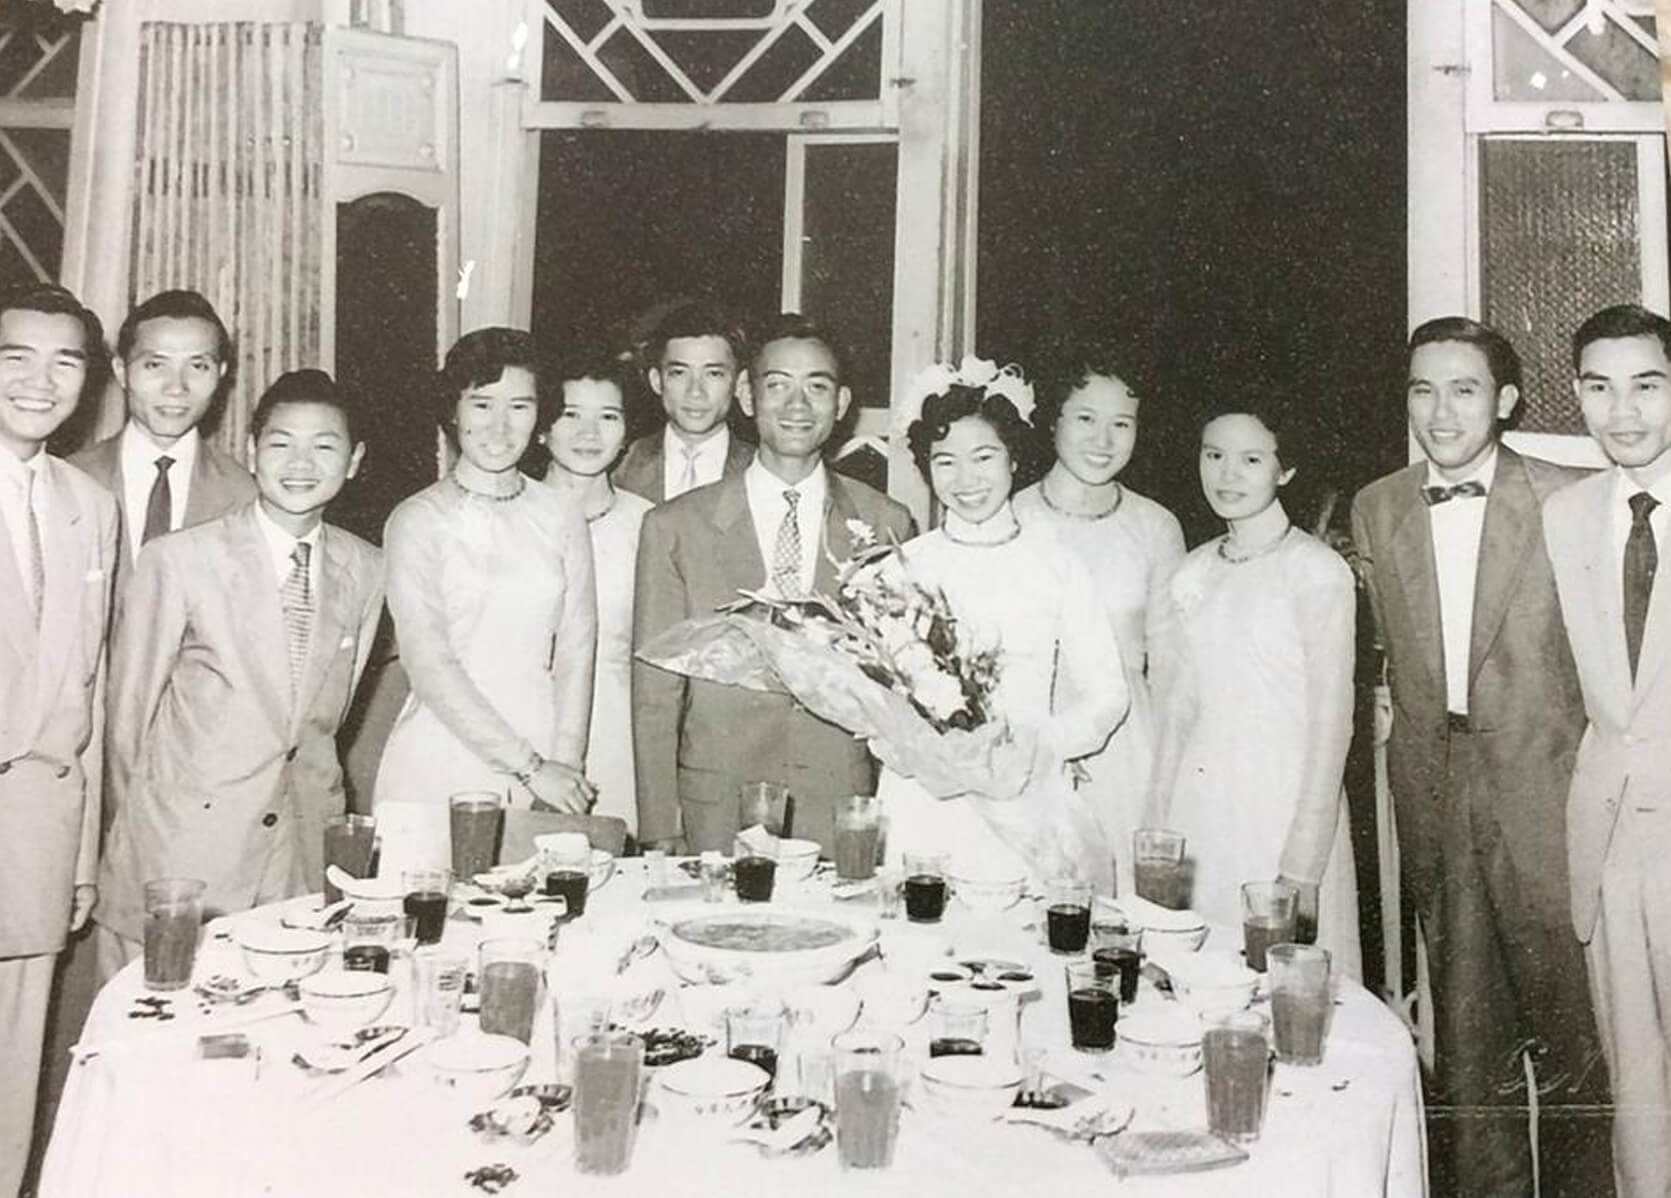 Black and white photo of a Vietnamese wedding party.